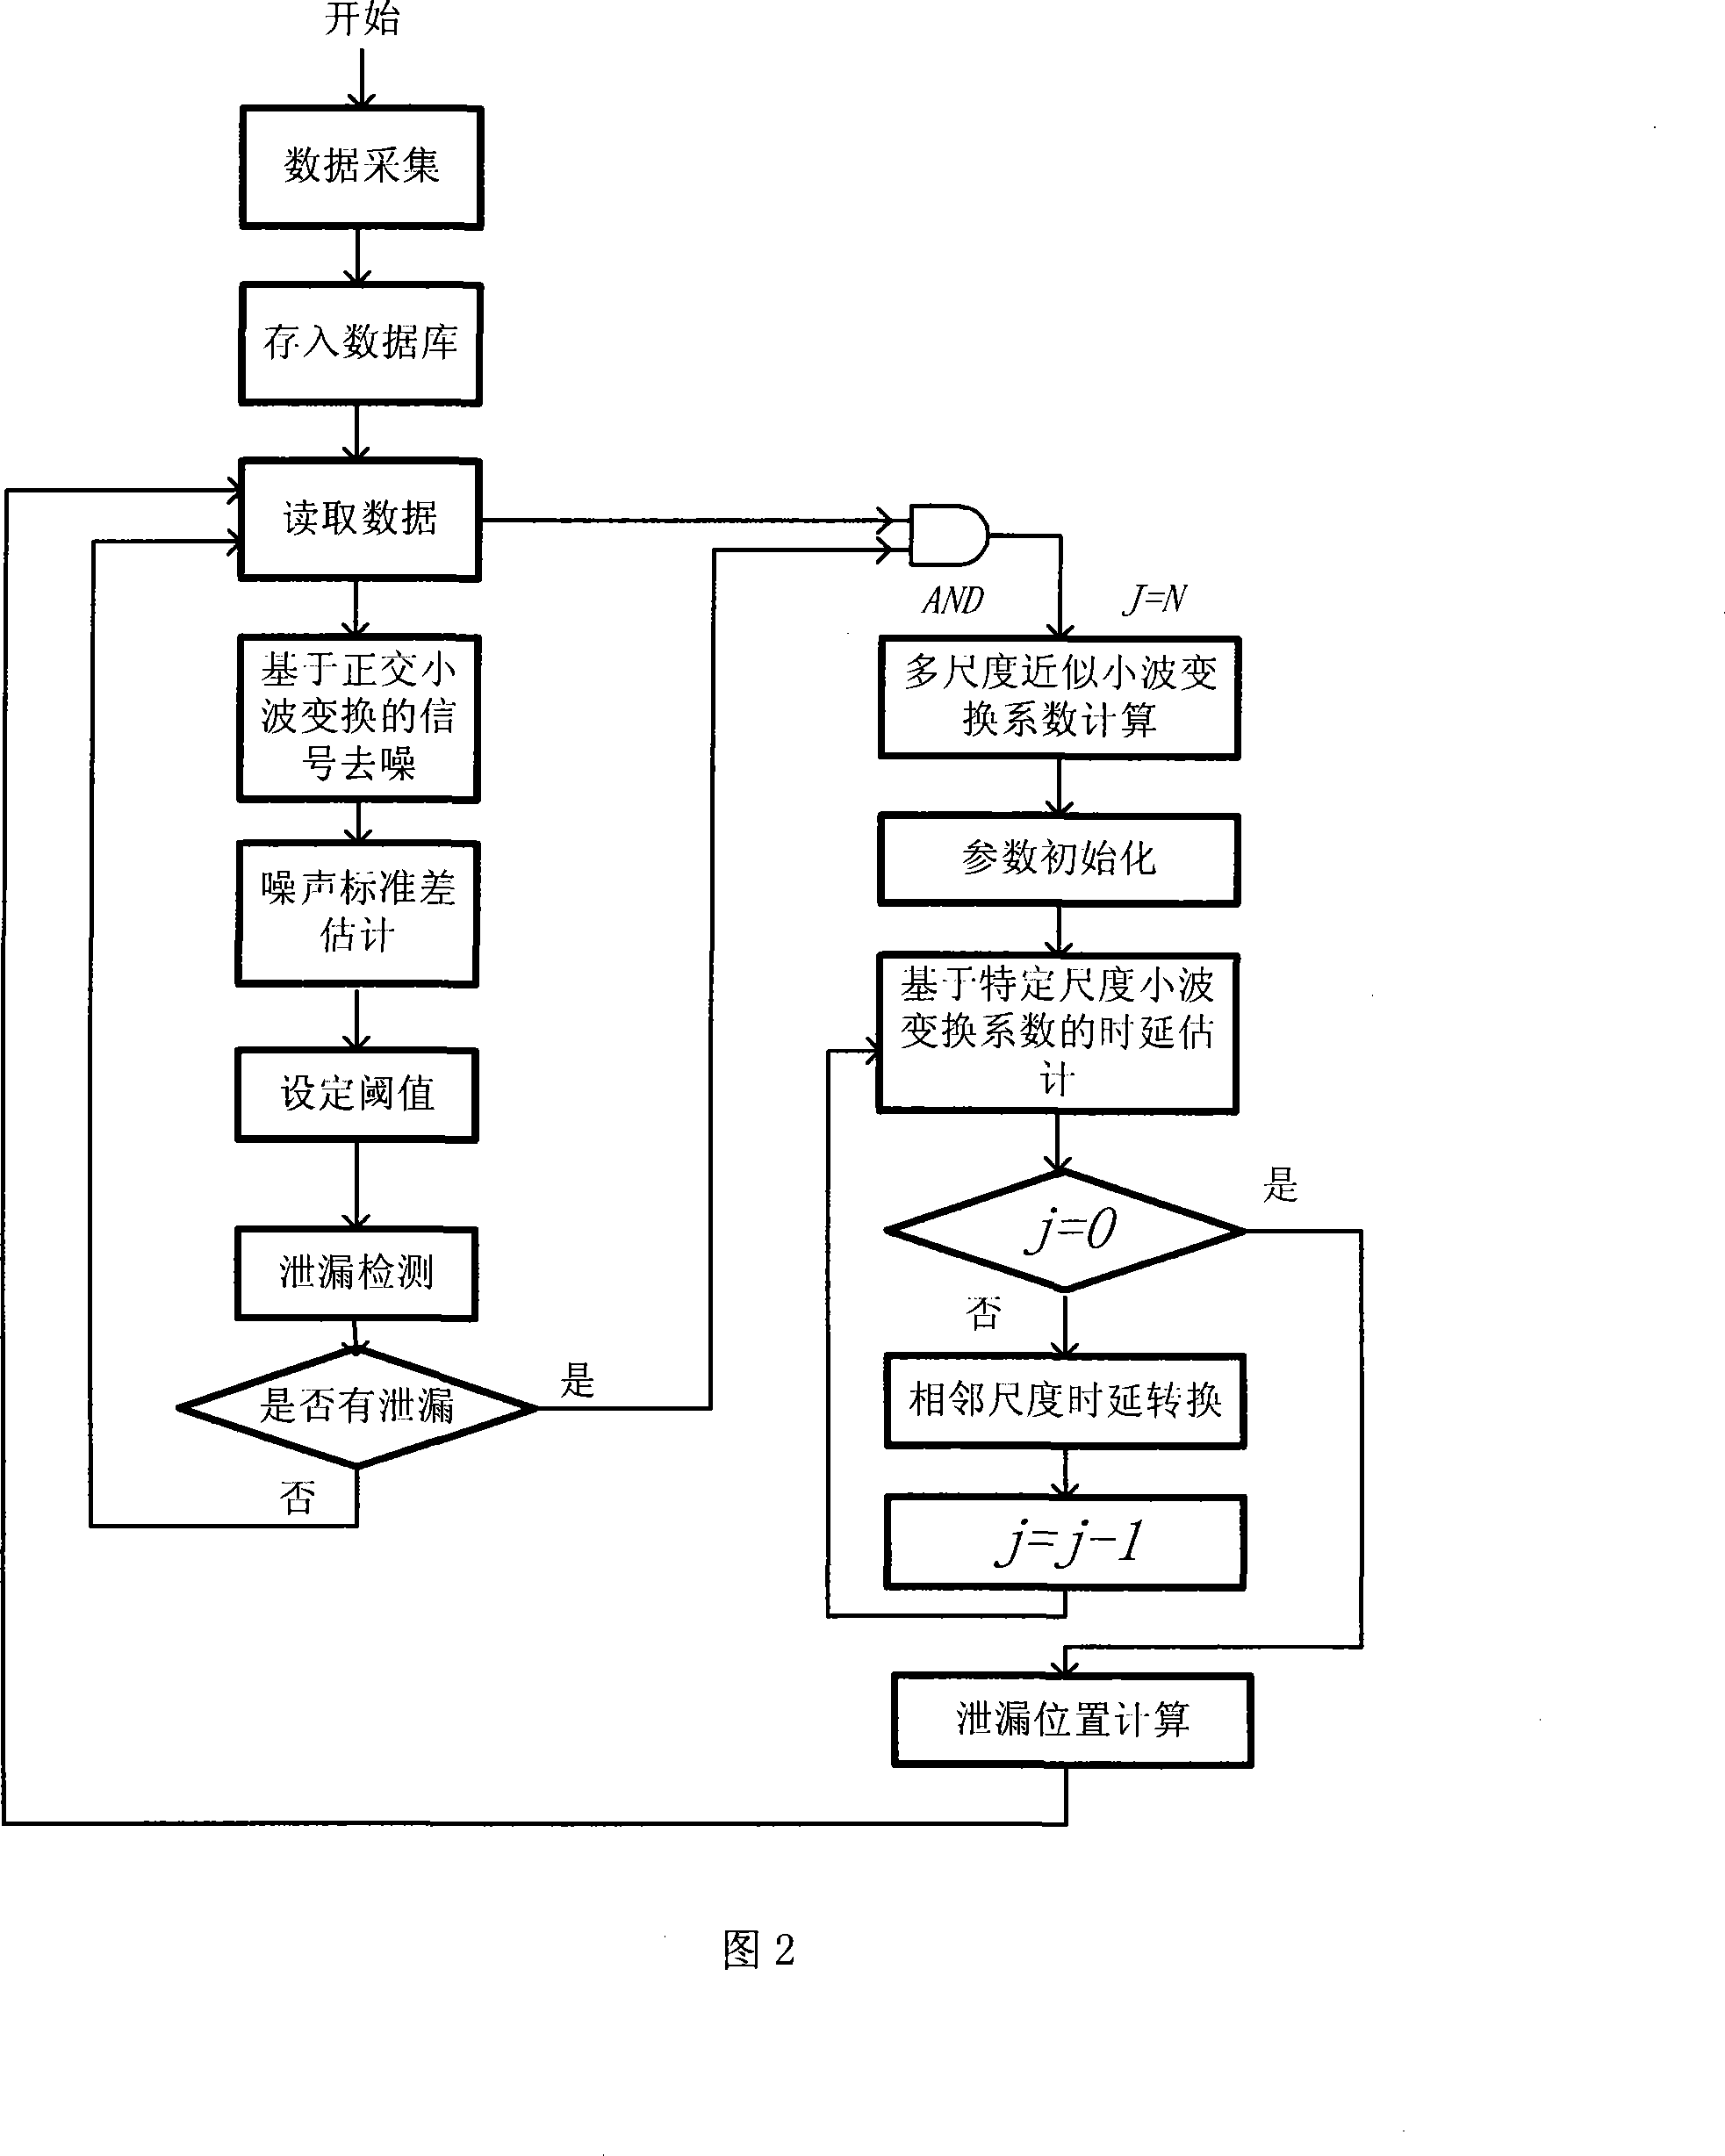 Leakage locating method combining self-adapting threshold value leak detection and multi-dimension fast delay time search